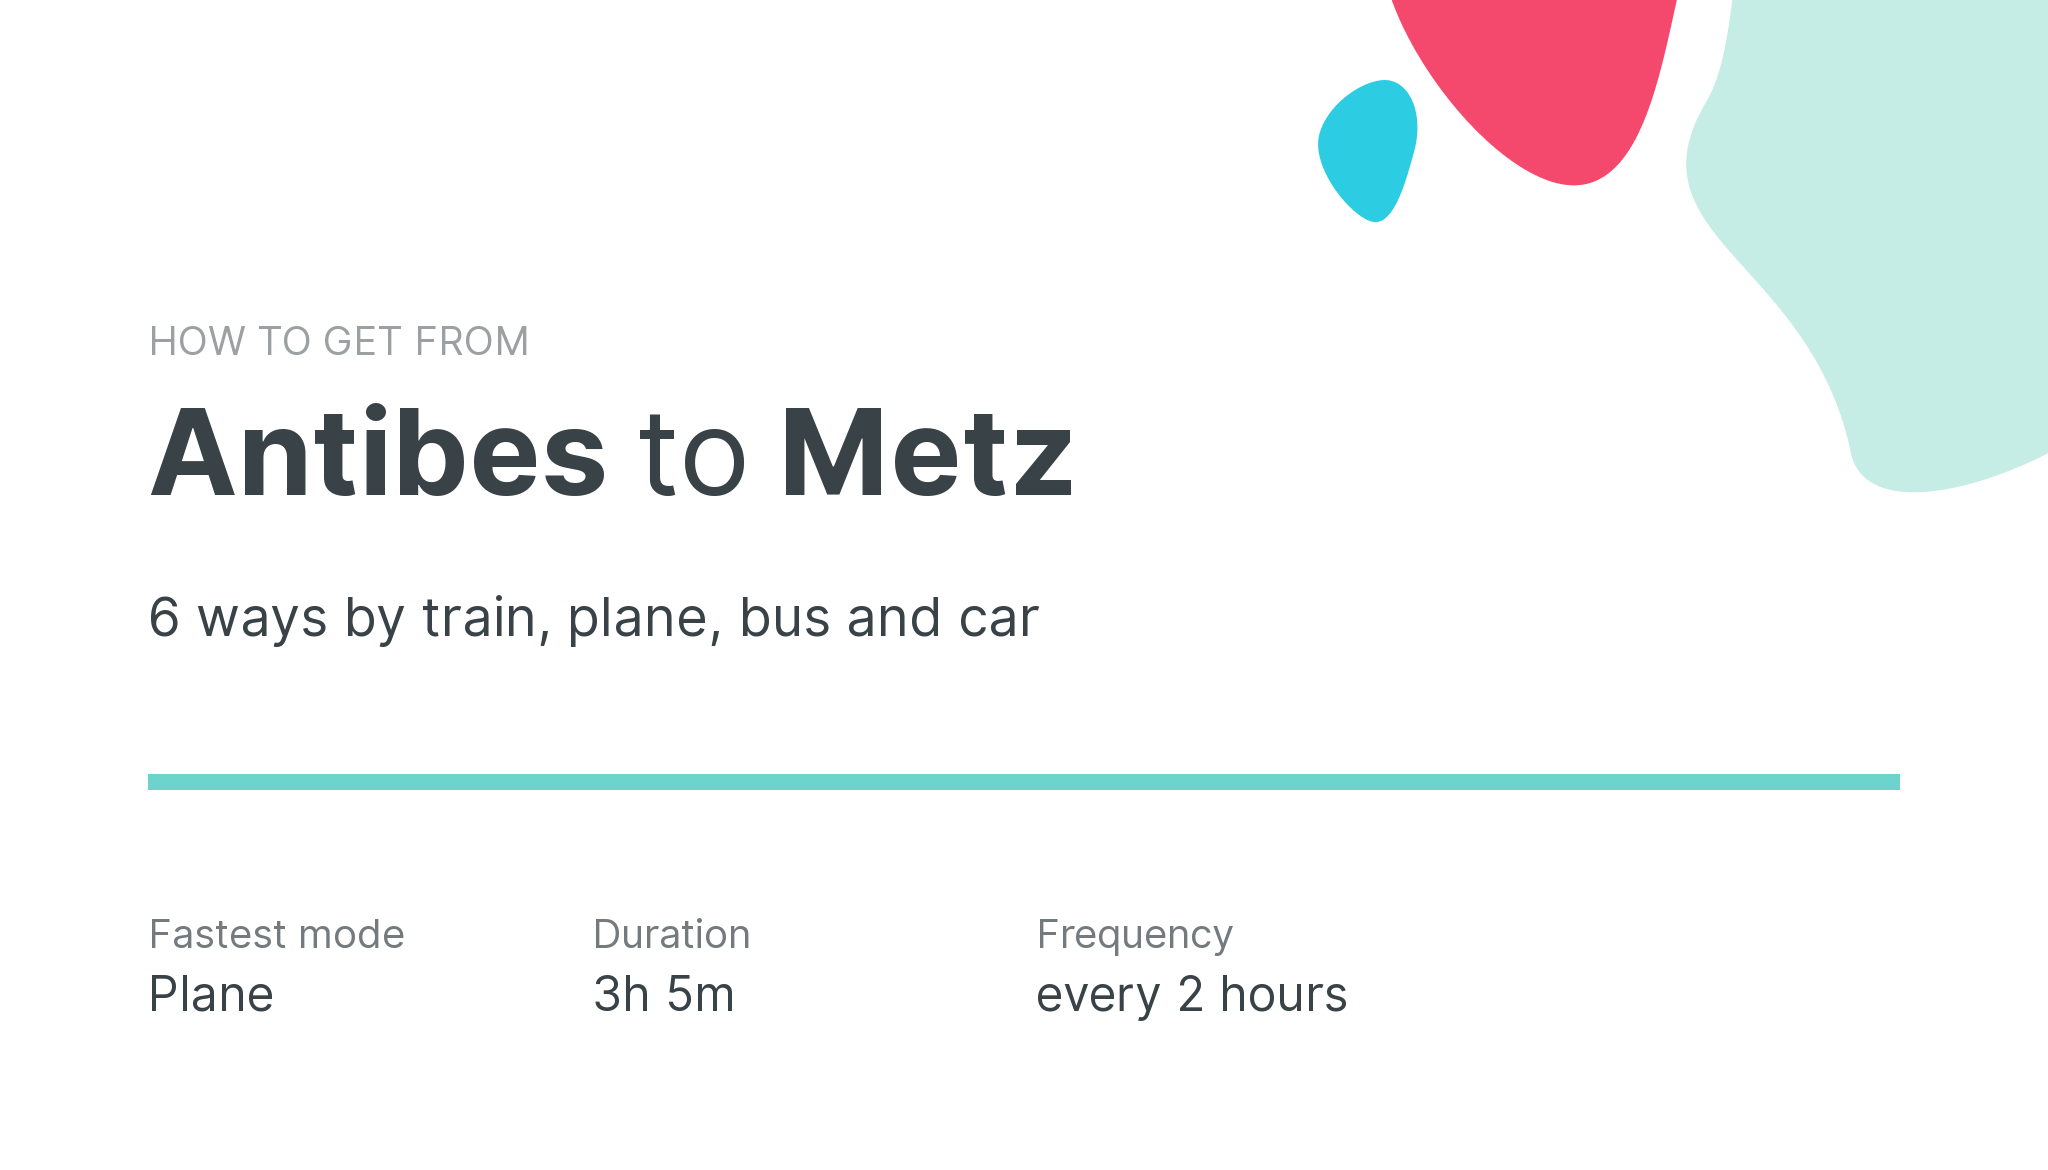 How do I get from Antibes to Metz